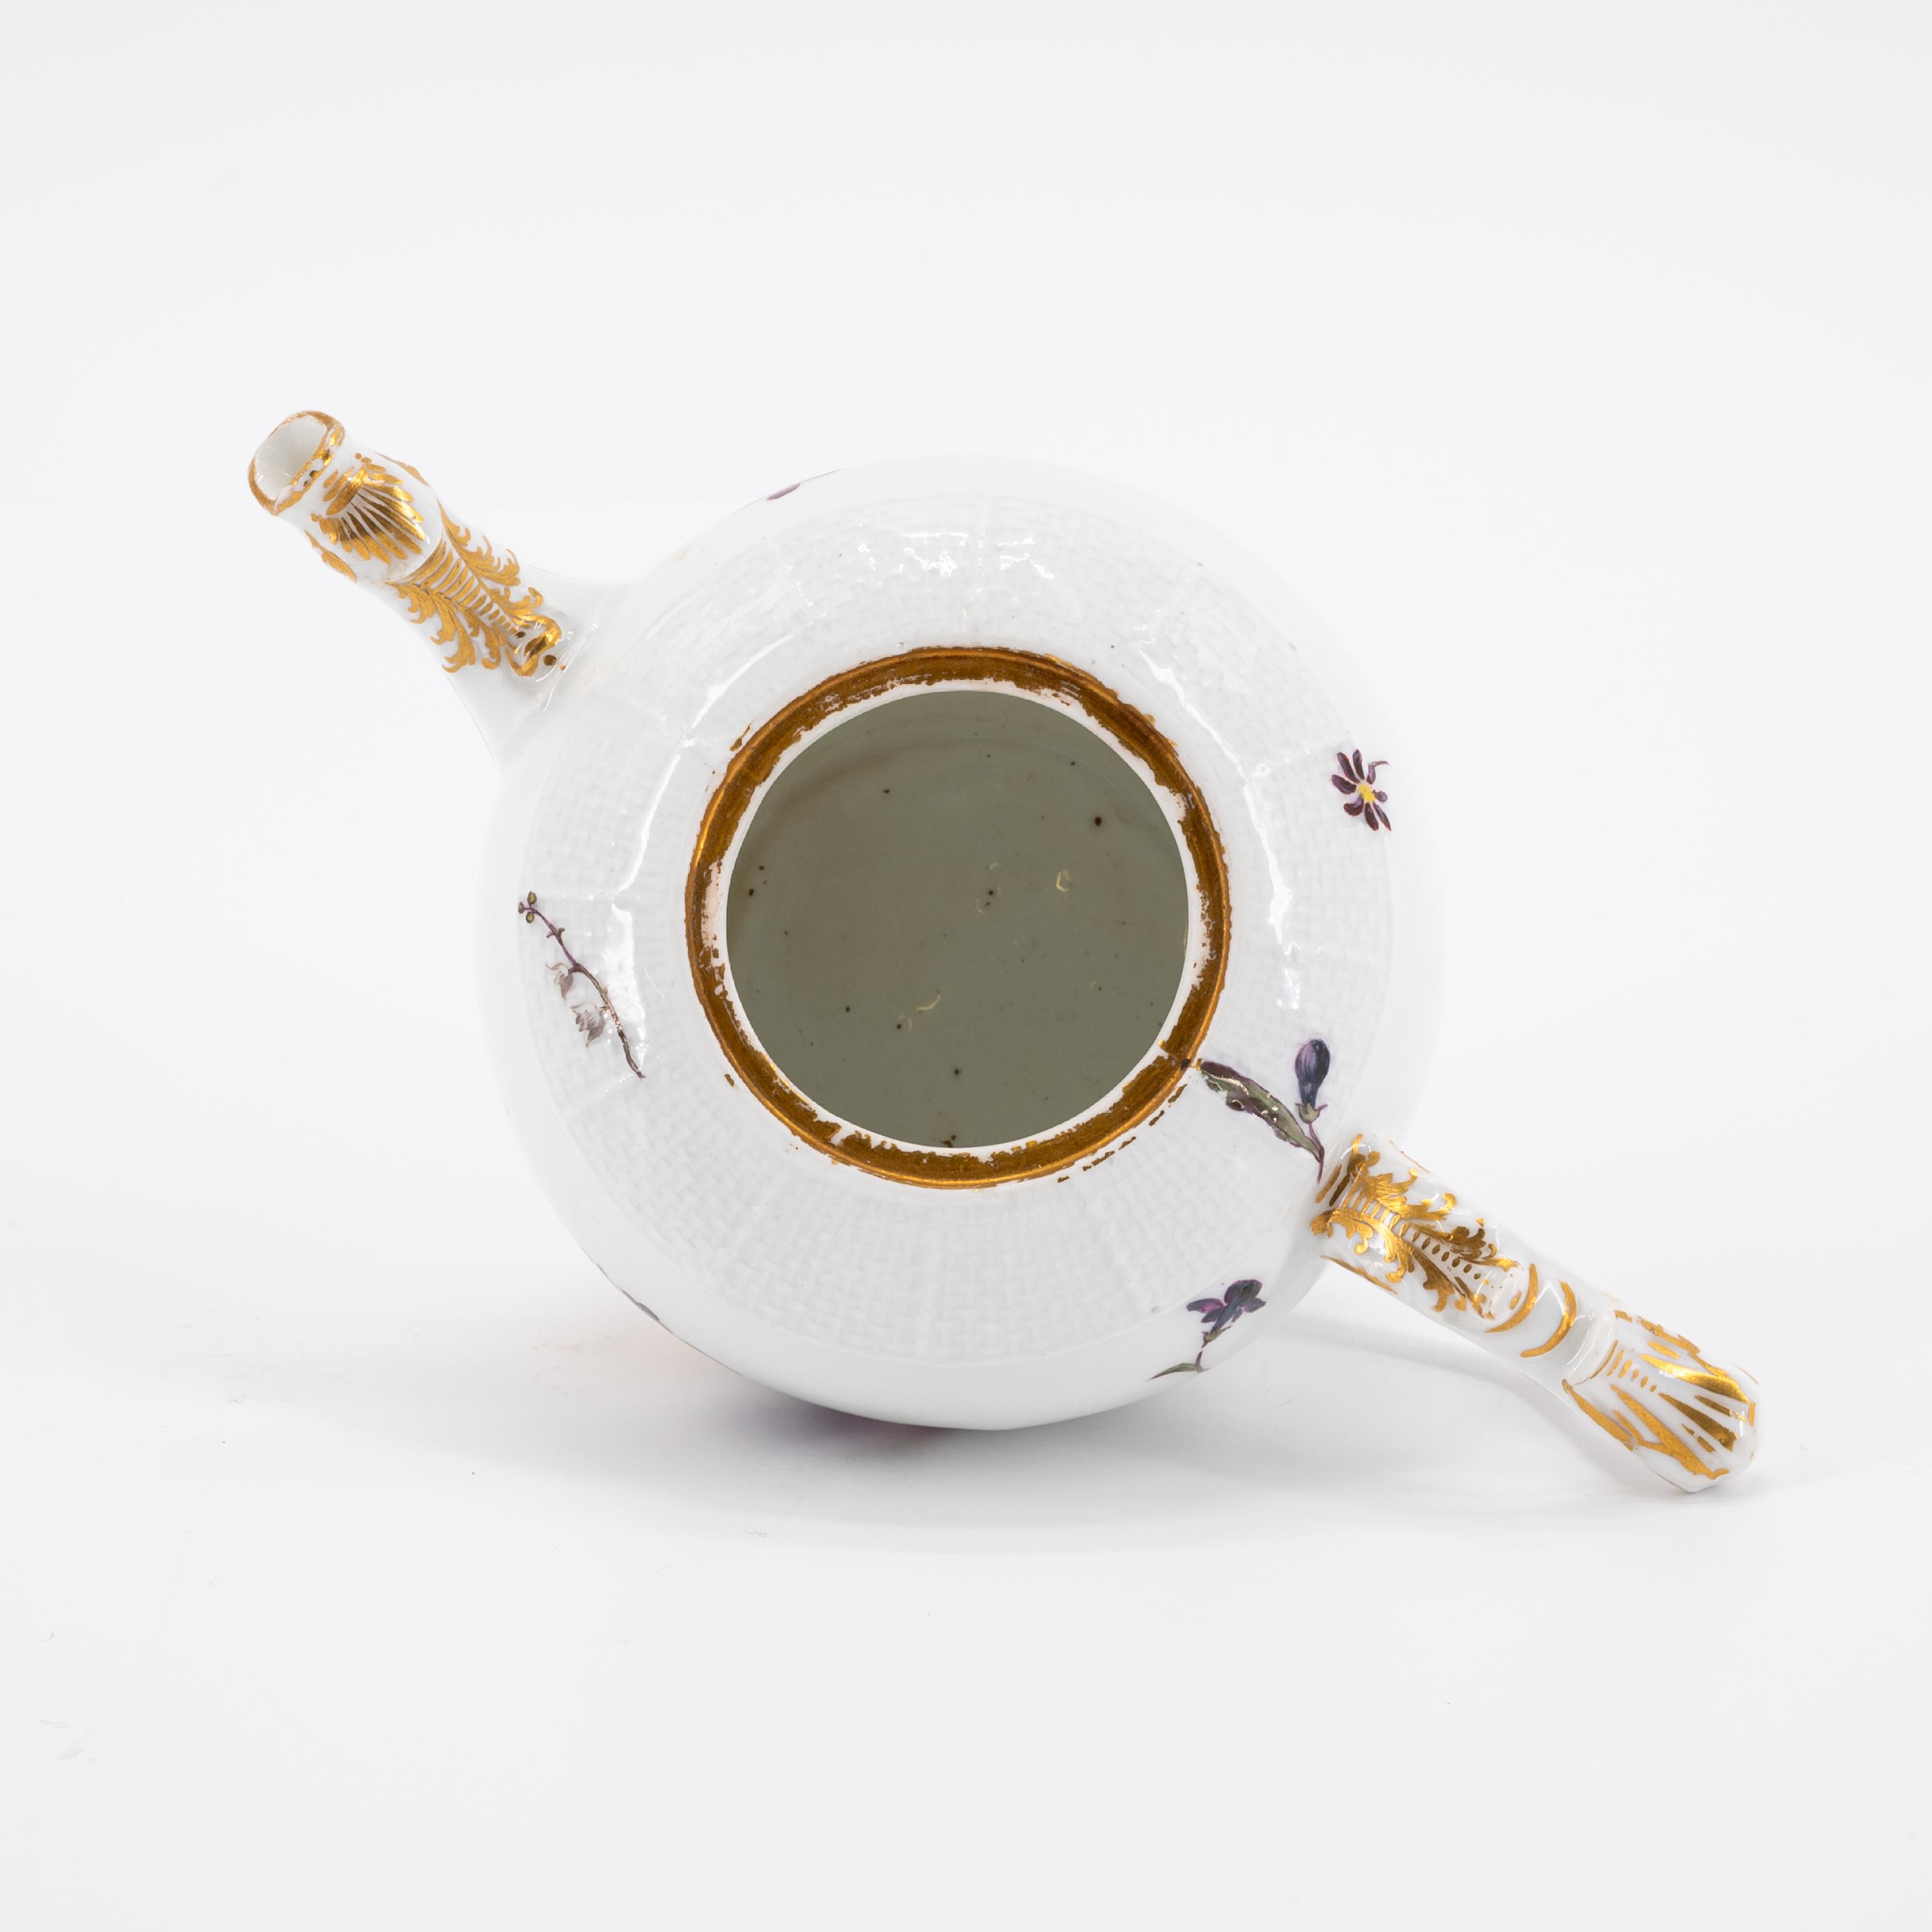 LARGE PORCELAIN LIDDED BOWL WITH FLOWER KNOB, SMALL TEA POT WITH WOODCUT FLOWERS AND CUP WITH SAUCER - Image 10 of 18